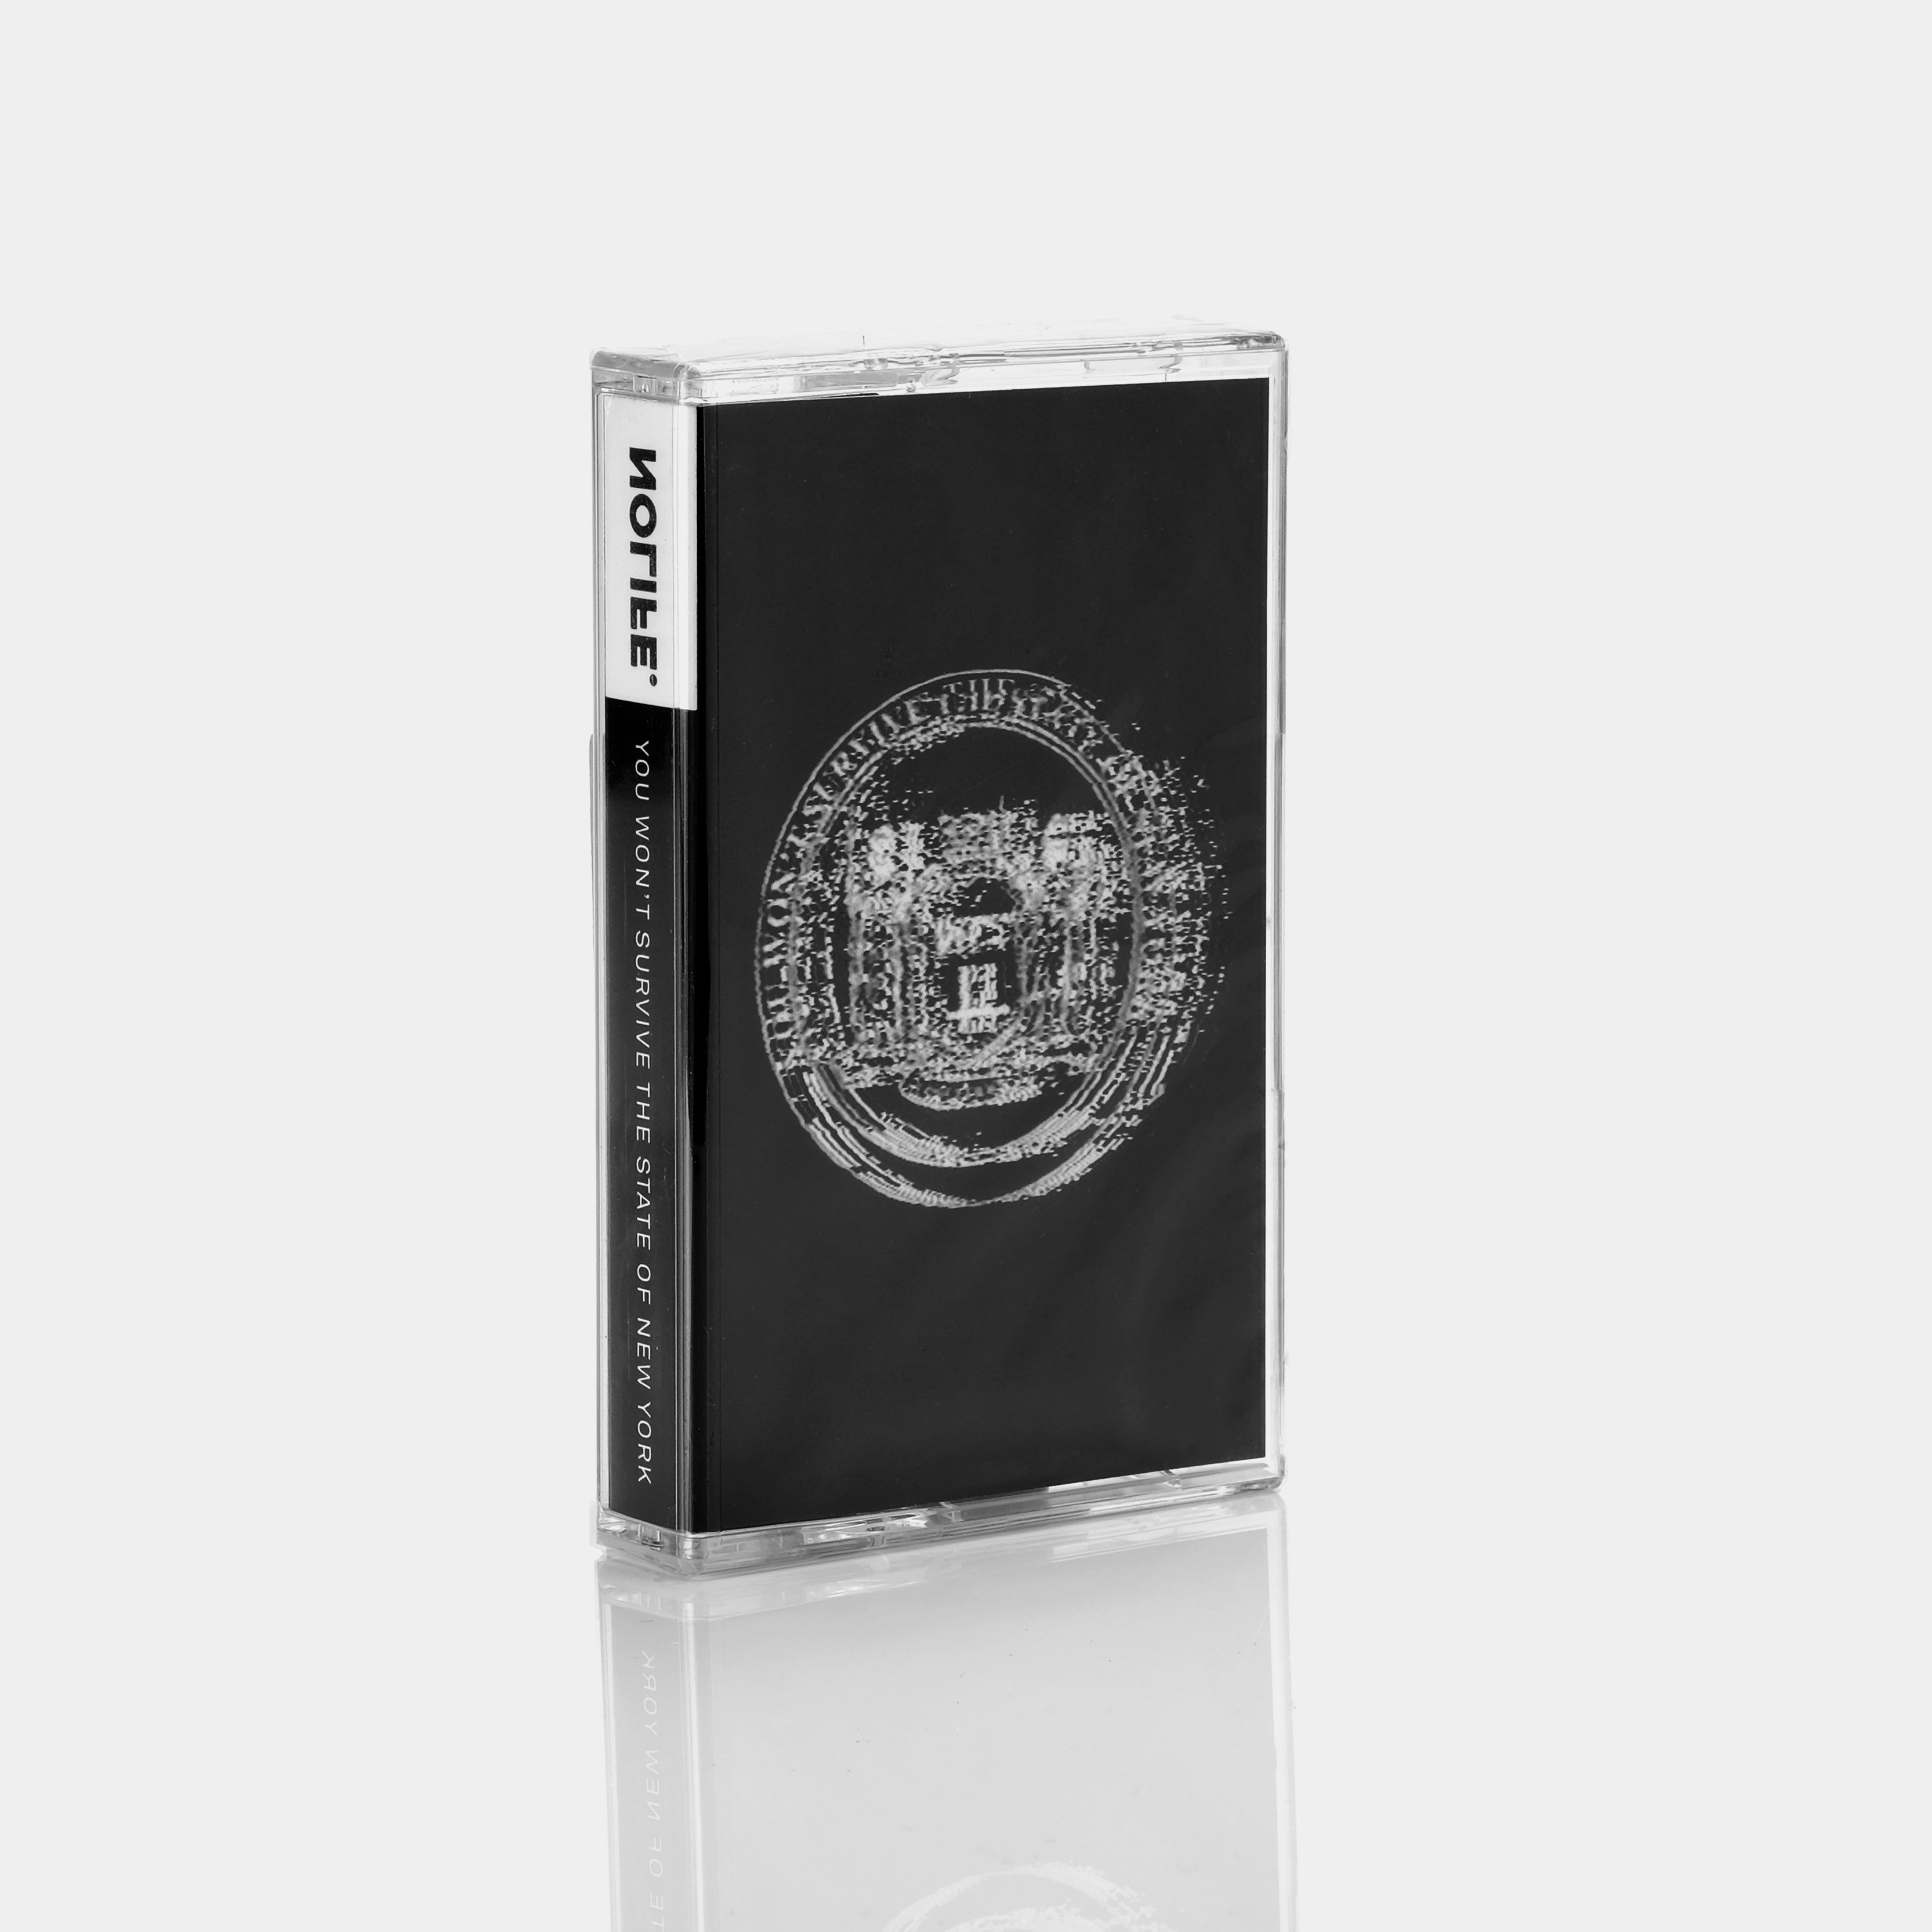 NOLIFE - YOU WON'T SURVIVE THE STATE OF NEW YORK Cassette Tape